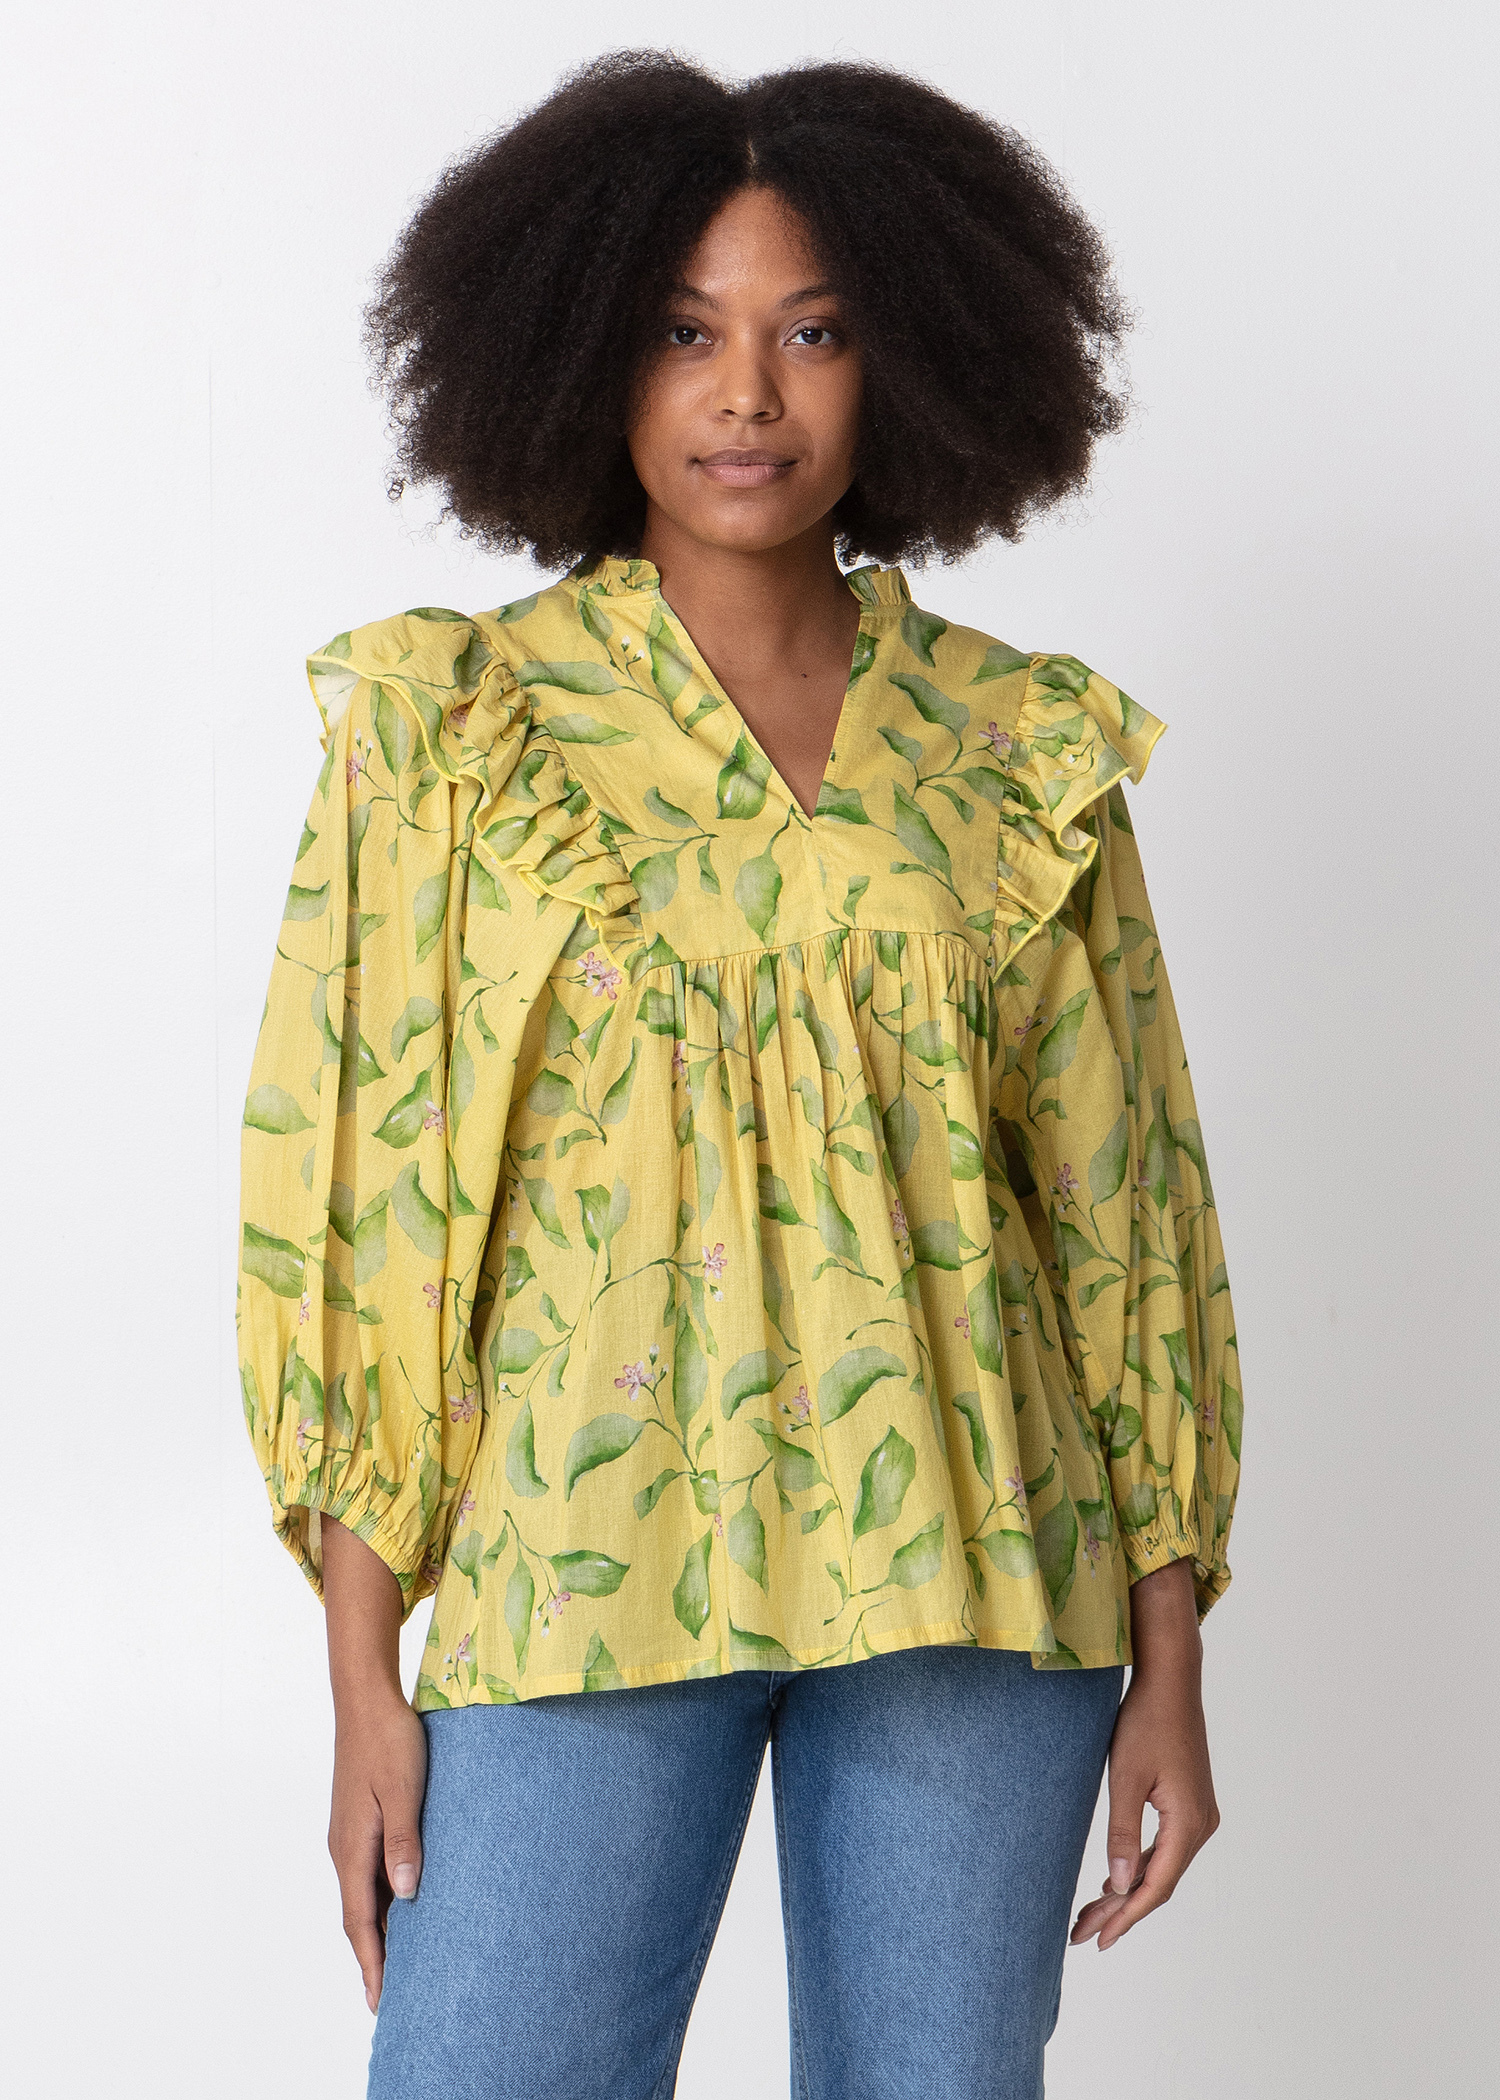 Patterned blouse with ruffles Image 0